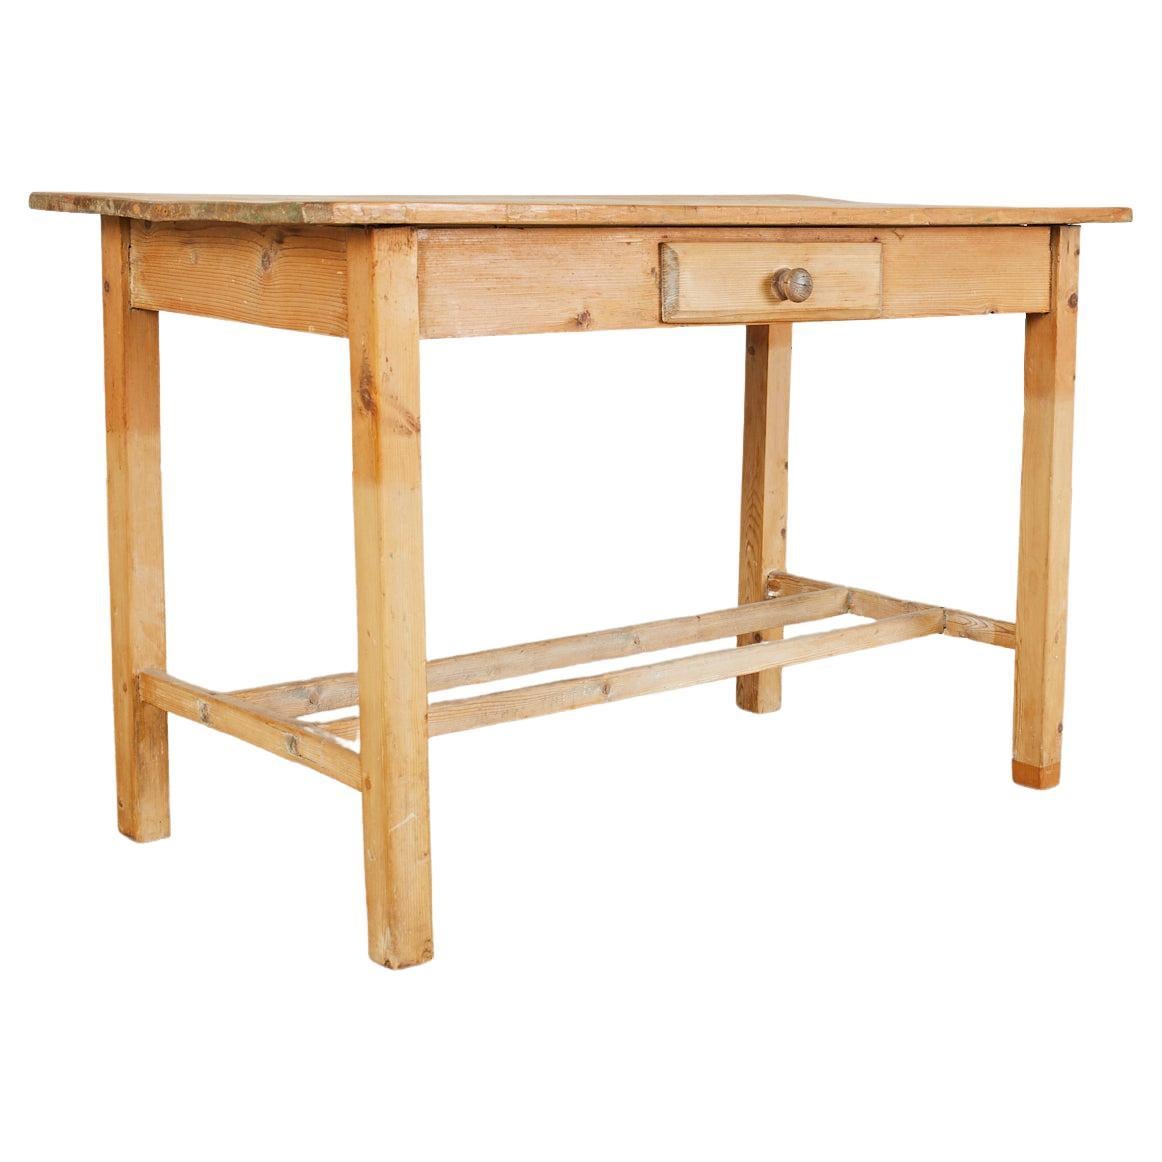 Rustic Country Pine Farmhouse Desk or Writing Table